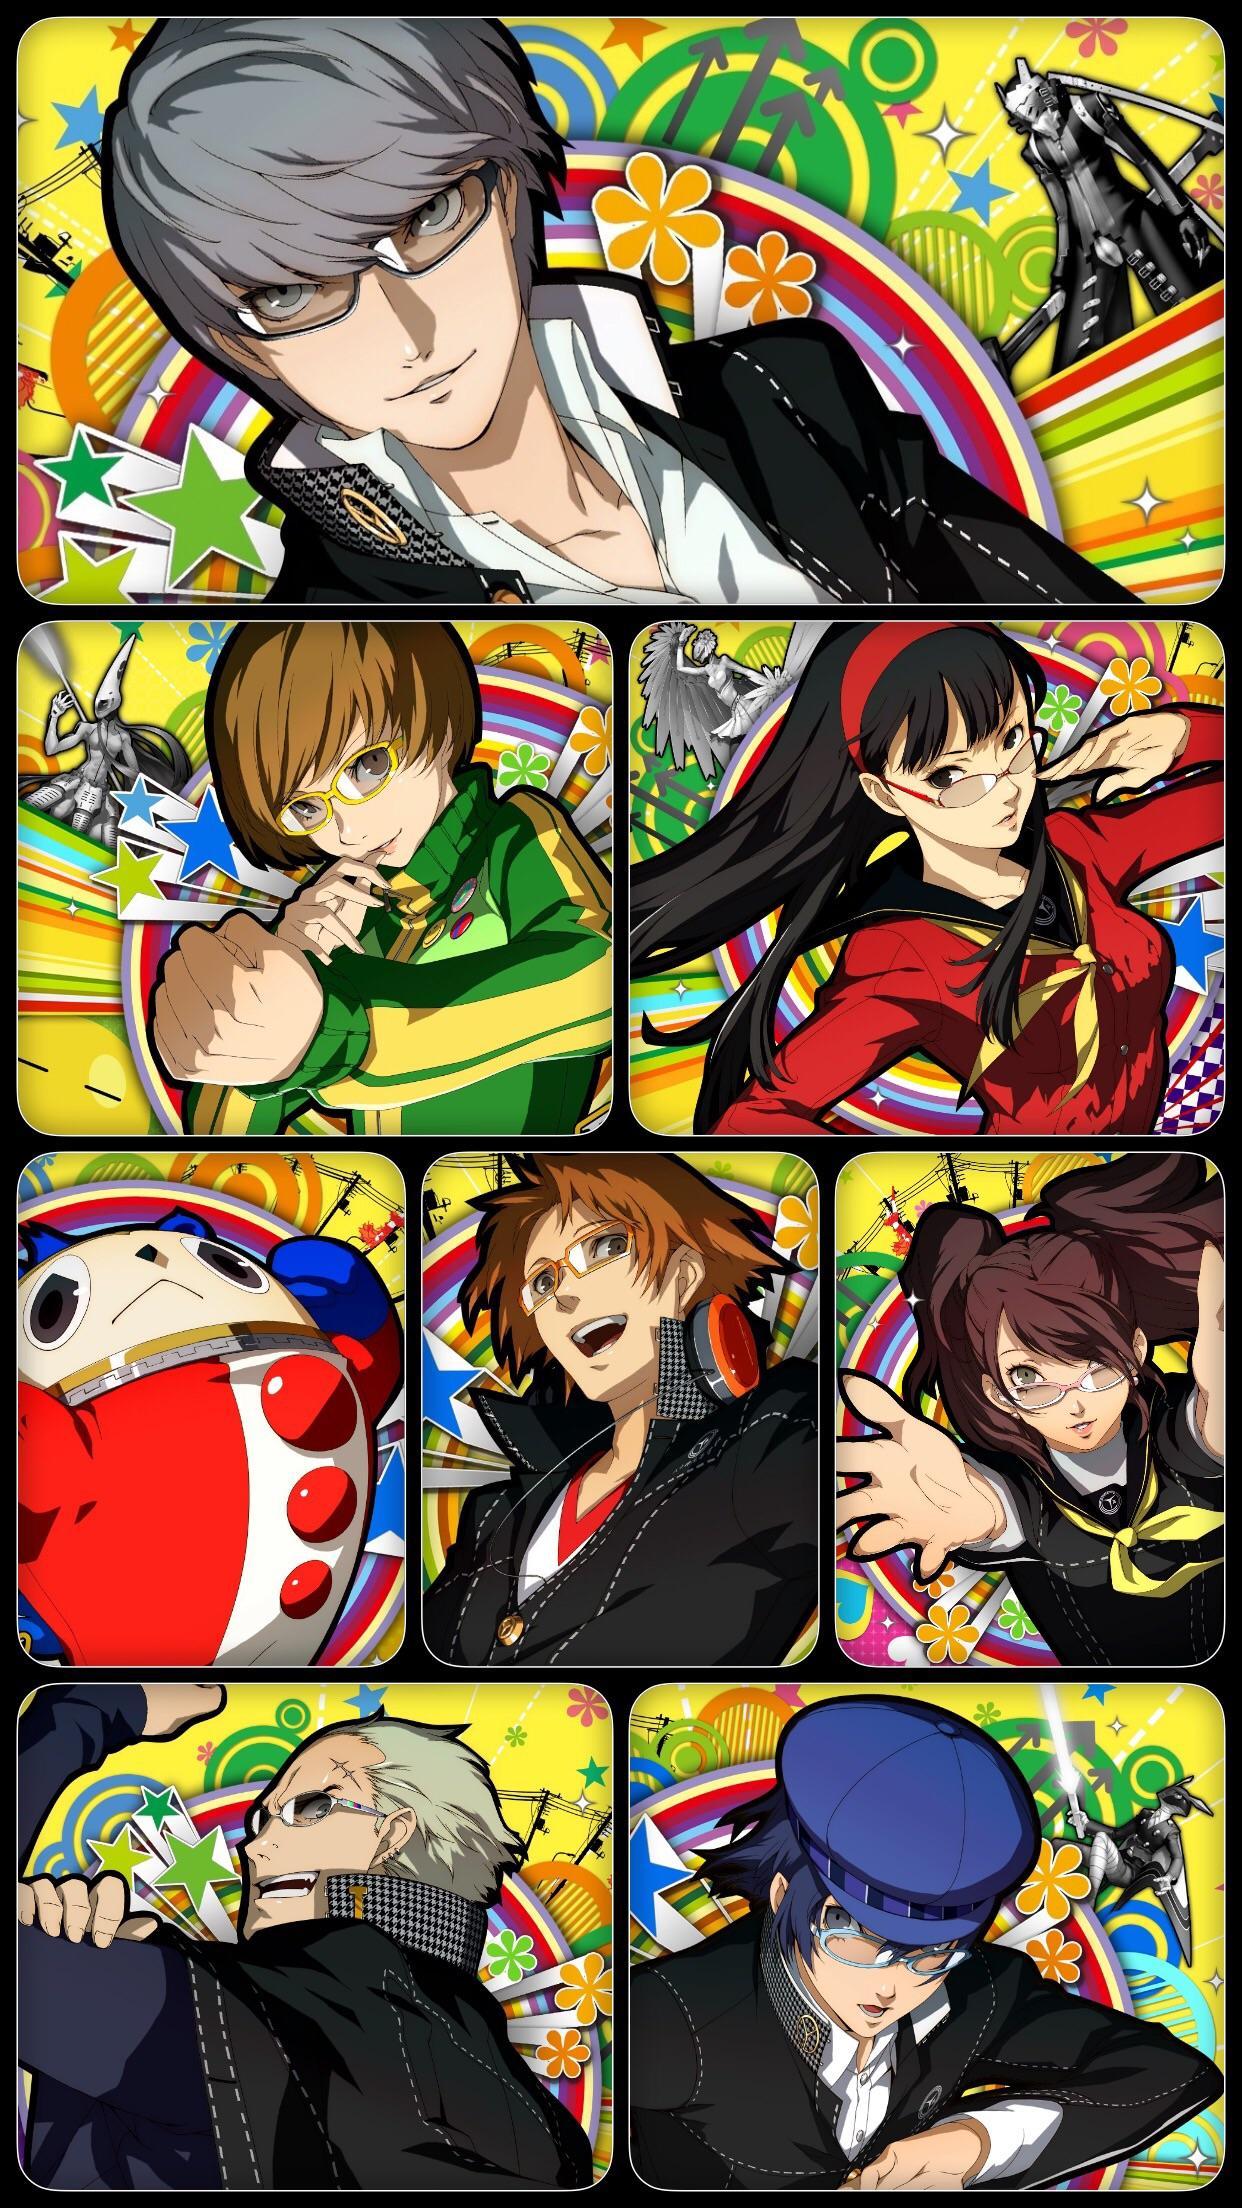 Persona 4 Golden Wallpapers Top Free Persona 4 Golden Backgrounds Wallpaperaccess